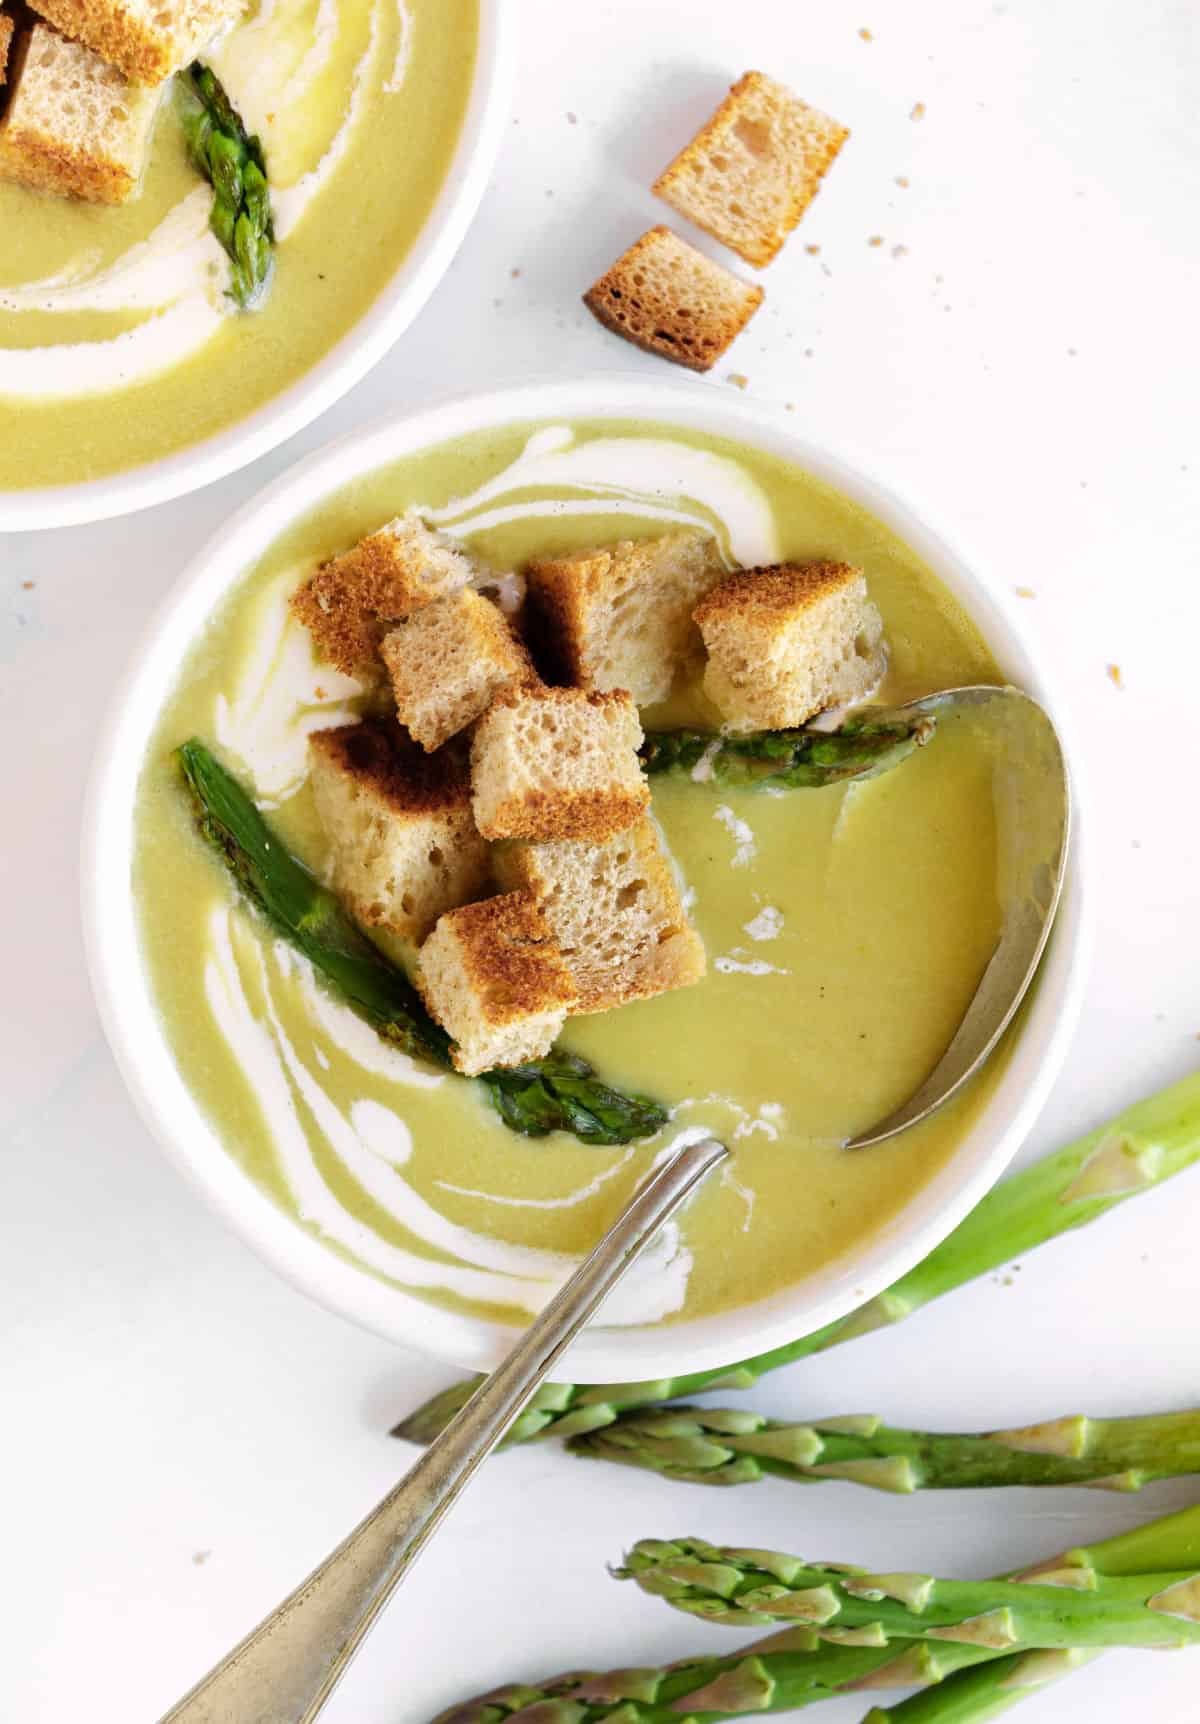 Croutons-topped white bowl of asparagus soup. Silver spoon. White surface.